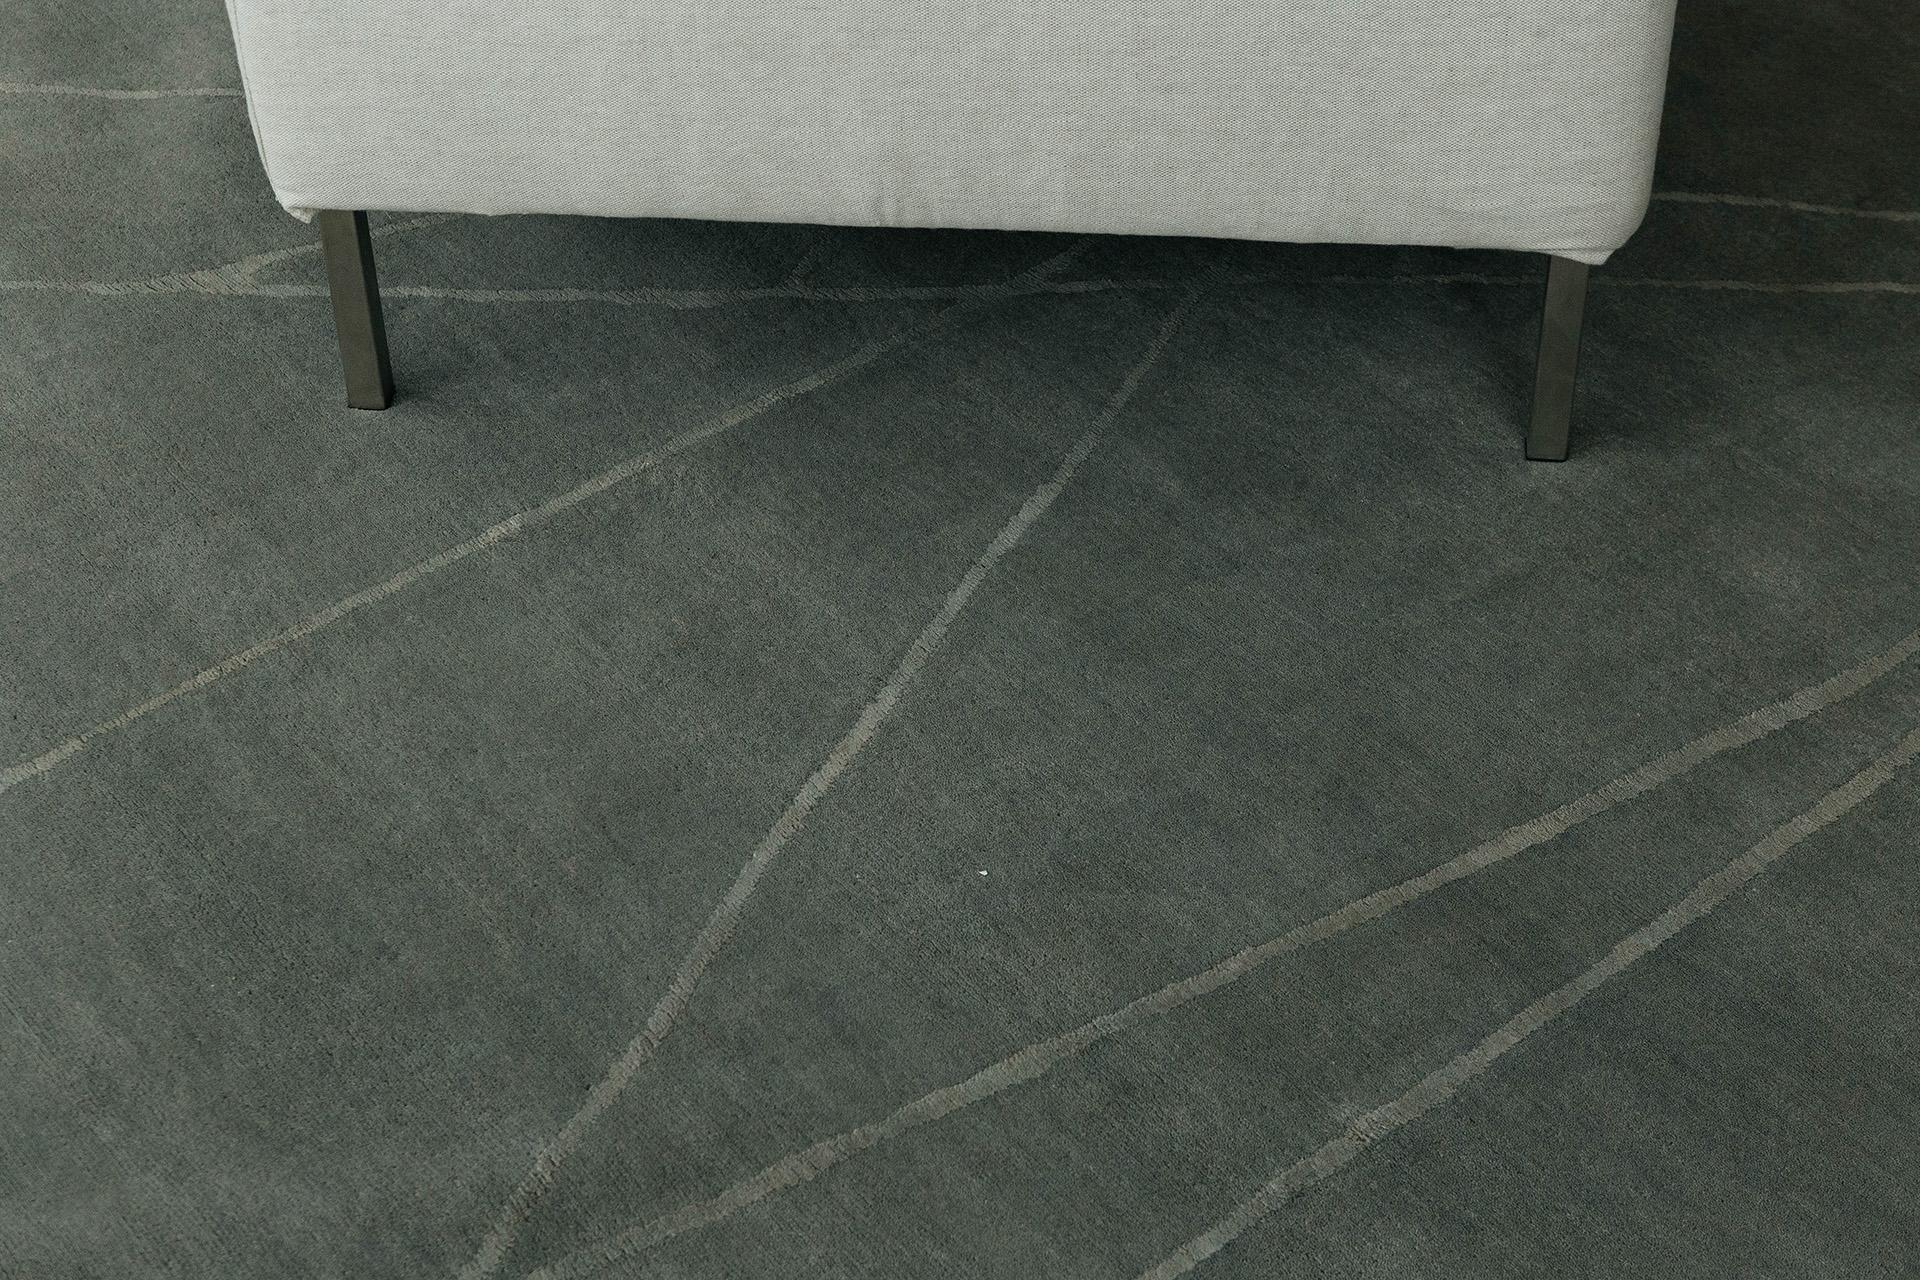 Some Time Soon' is a handwoven modern abstract rug made of wool and silk. It is a part of our design Rhymes collection which pulls inspiration from different aspects of architecture. The thin gray linework moving across the rug creates a wide space